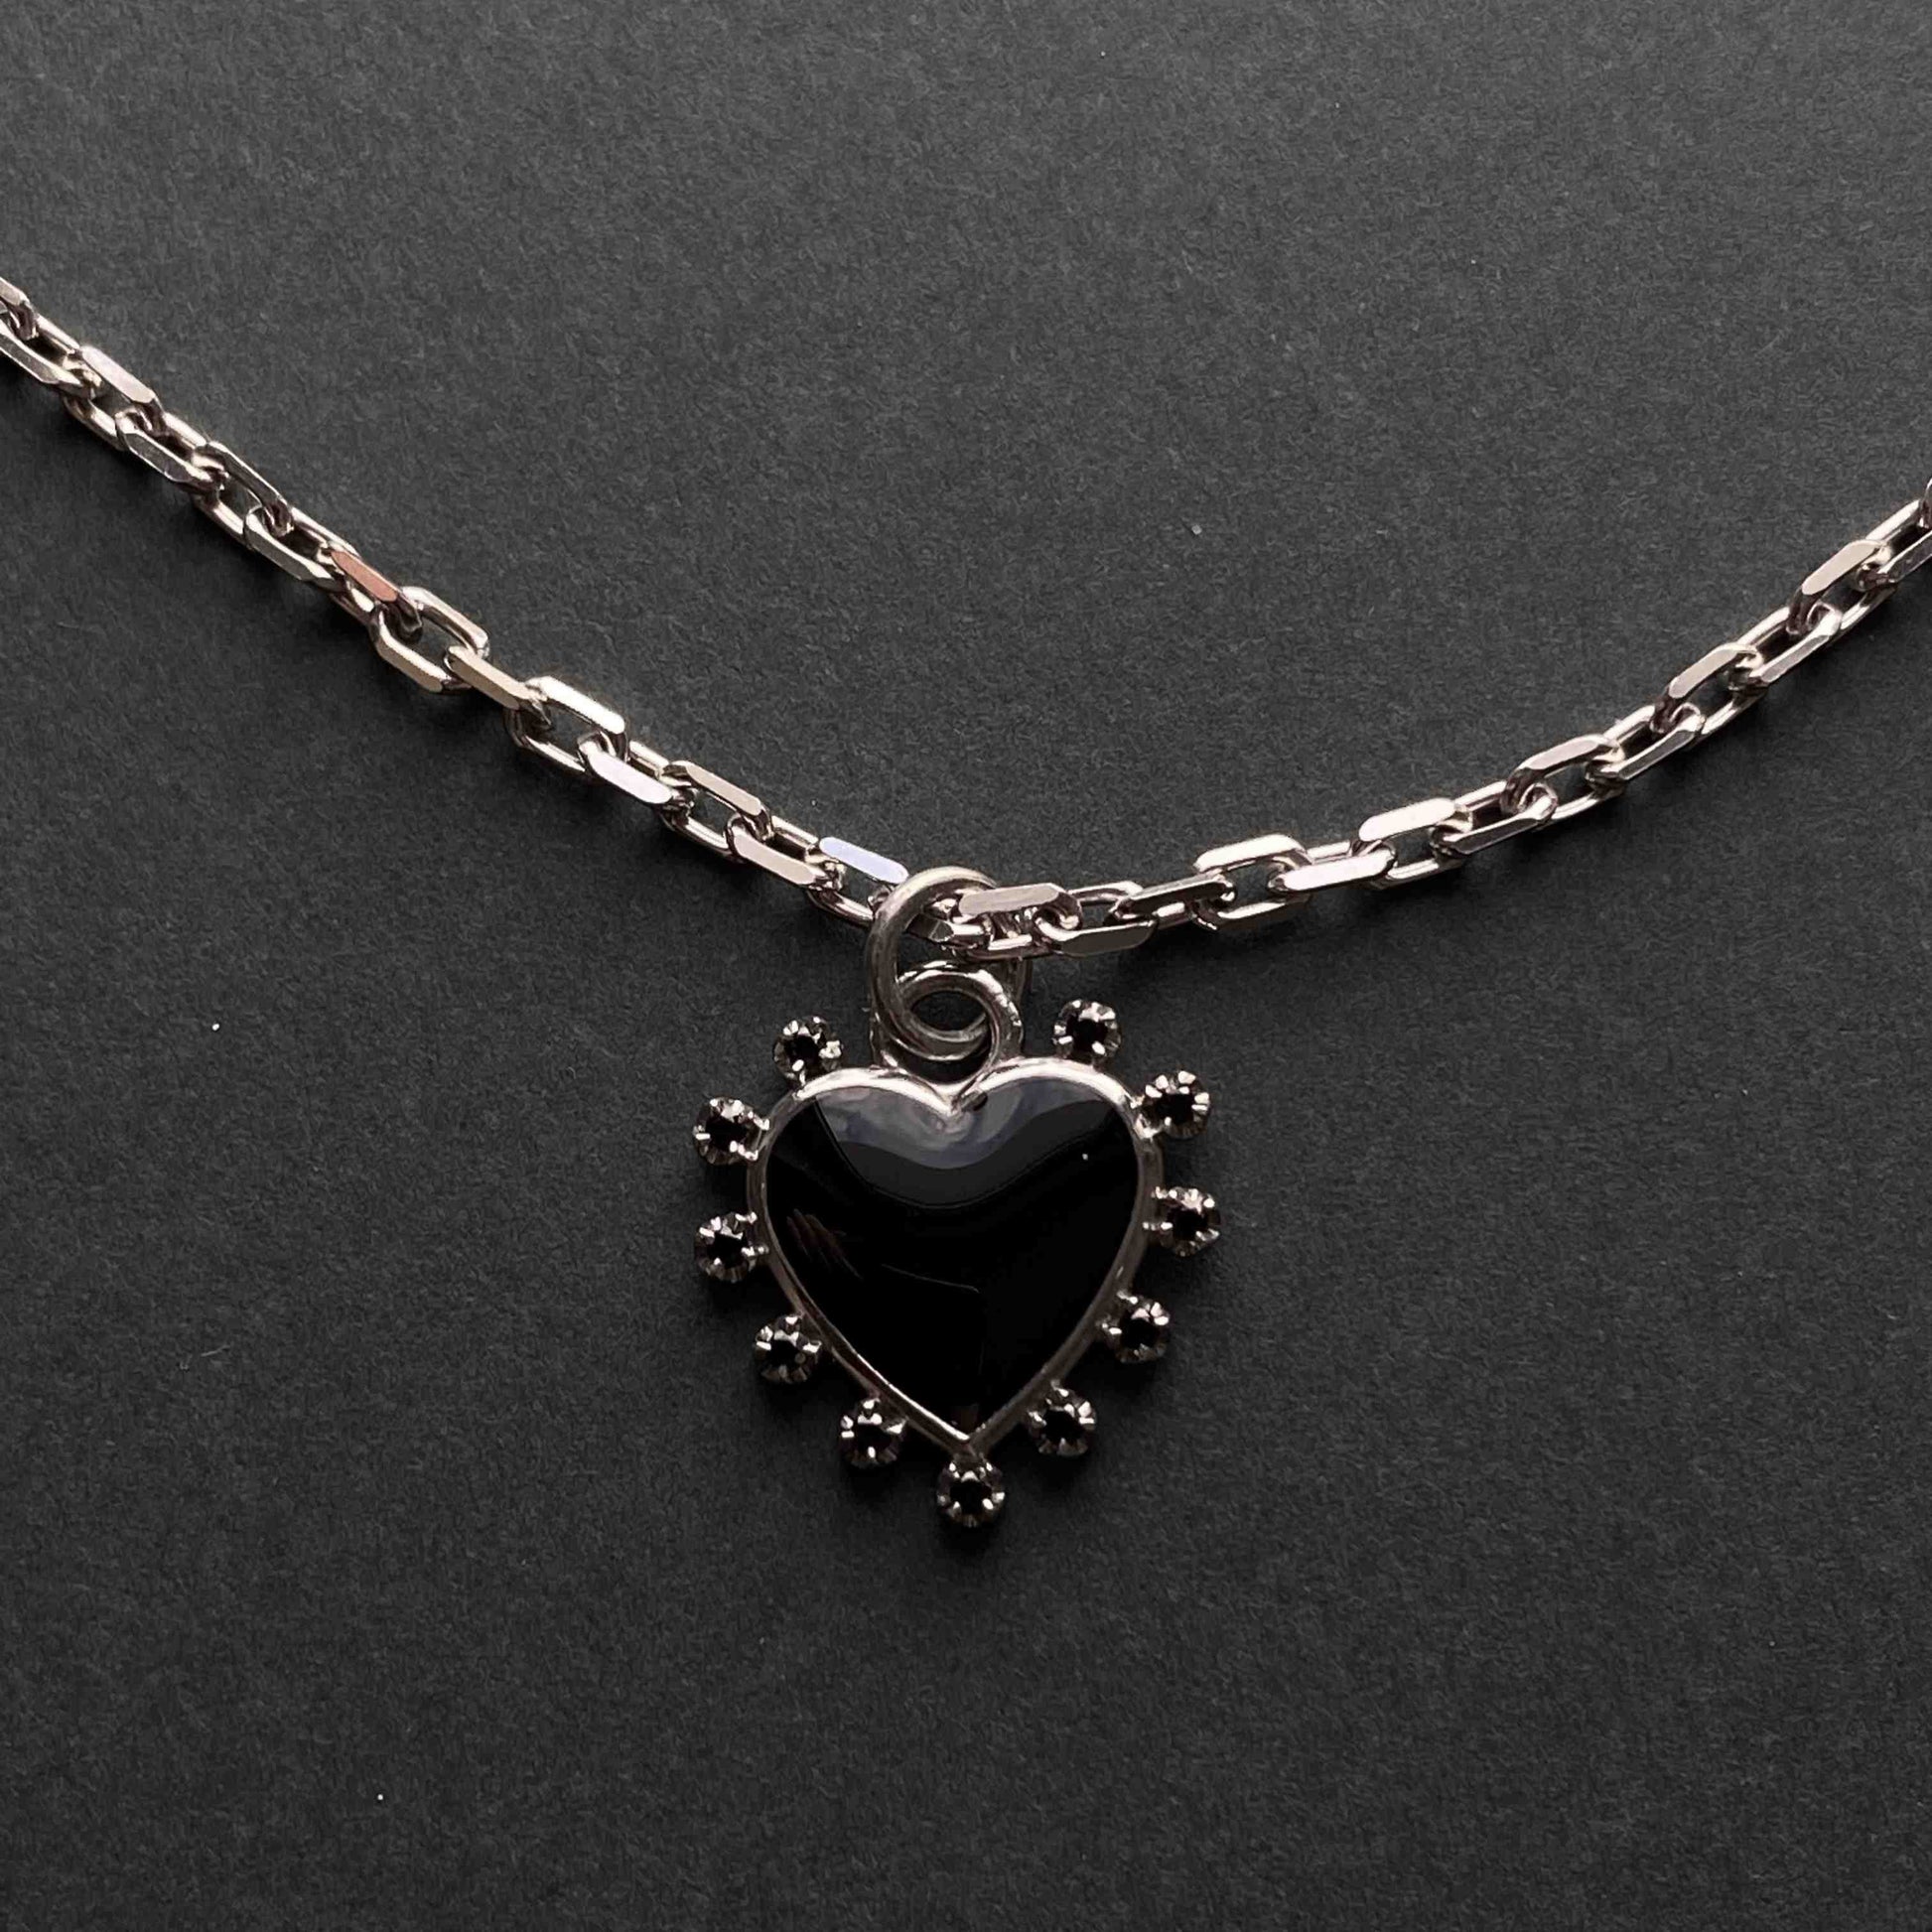 PENDANT "HEART" WITH ENAMEL & BLACK SPINEL ON A CHAIN / SILVER